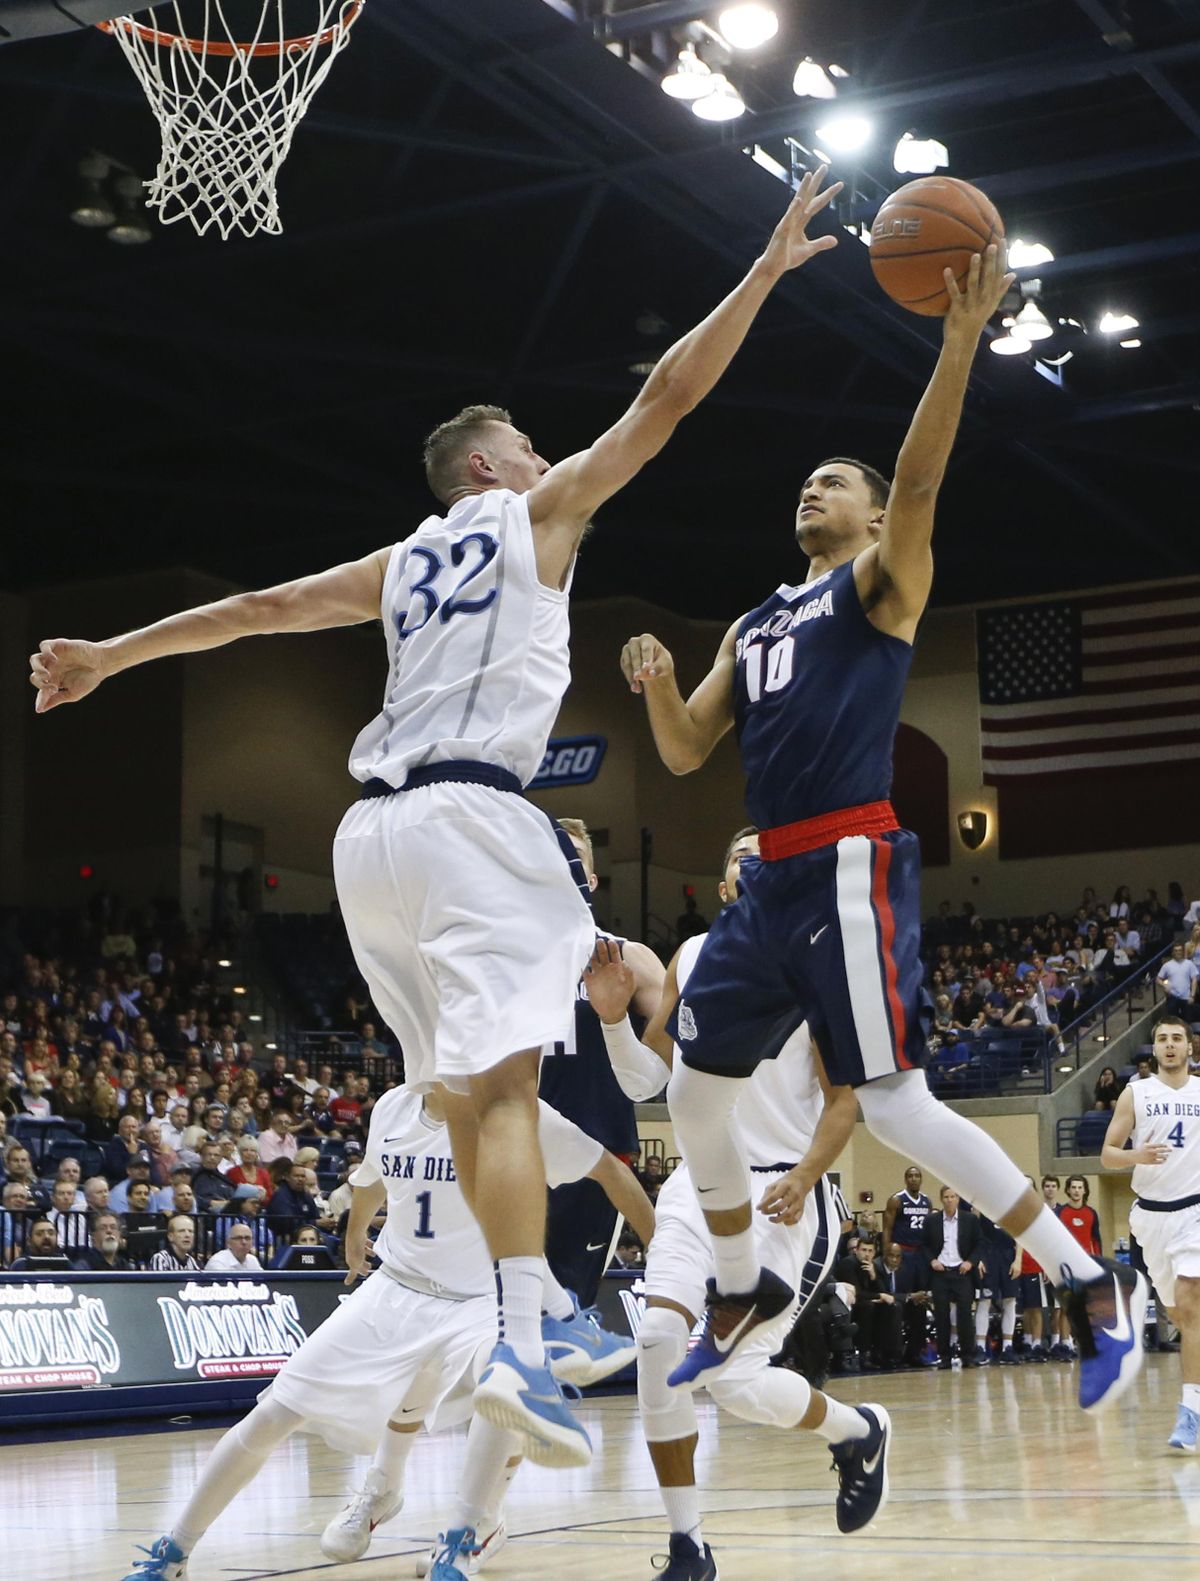 Gonzaga guard Bryan Alberts puts a shot up over the defense of San Diego forward Brett Bailey during the first half of an NCAA college basketball game Thursday, Feb. 25, 2016, in San Diego. (Lenny Ignelzi / Associated Press)